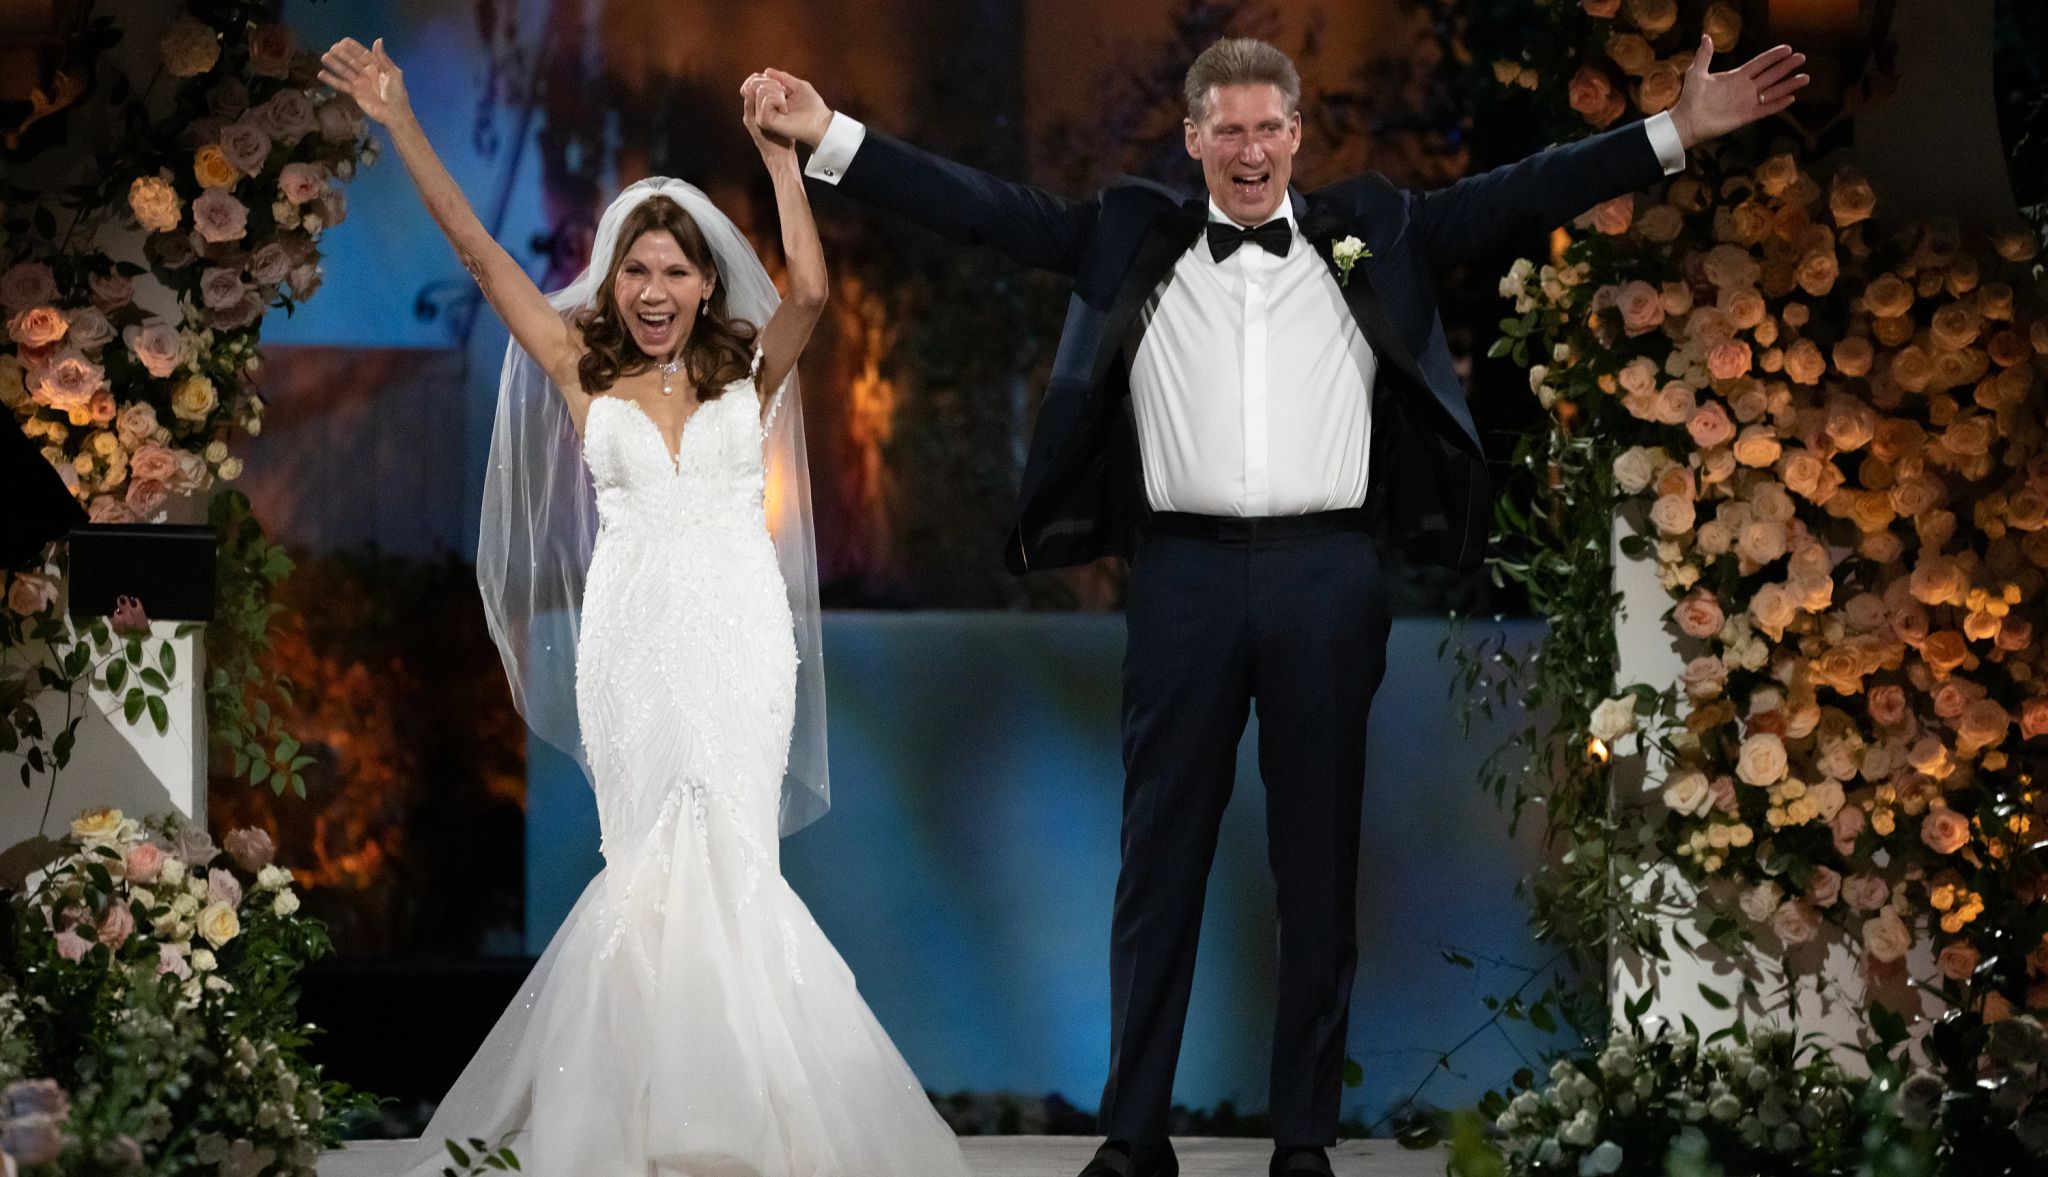 The Golden Bachelor couple Gerry Turner and Theresa Nist raise their arms in the air after getting married